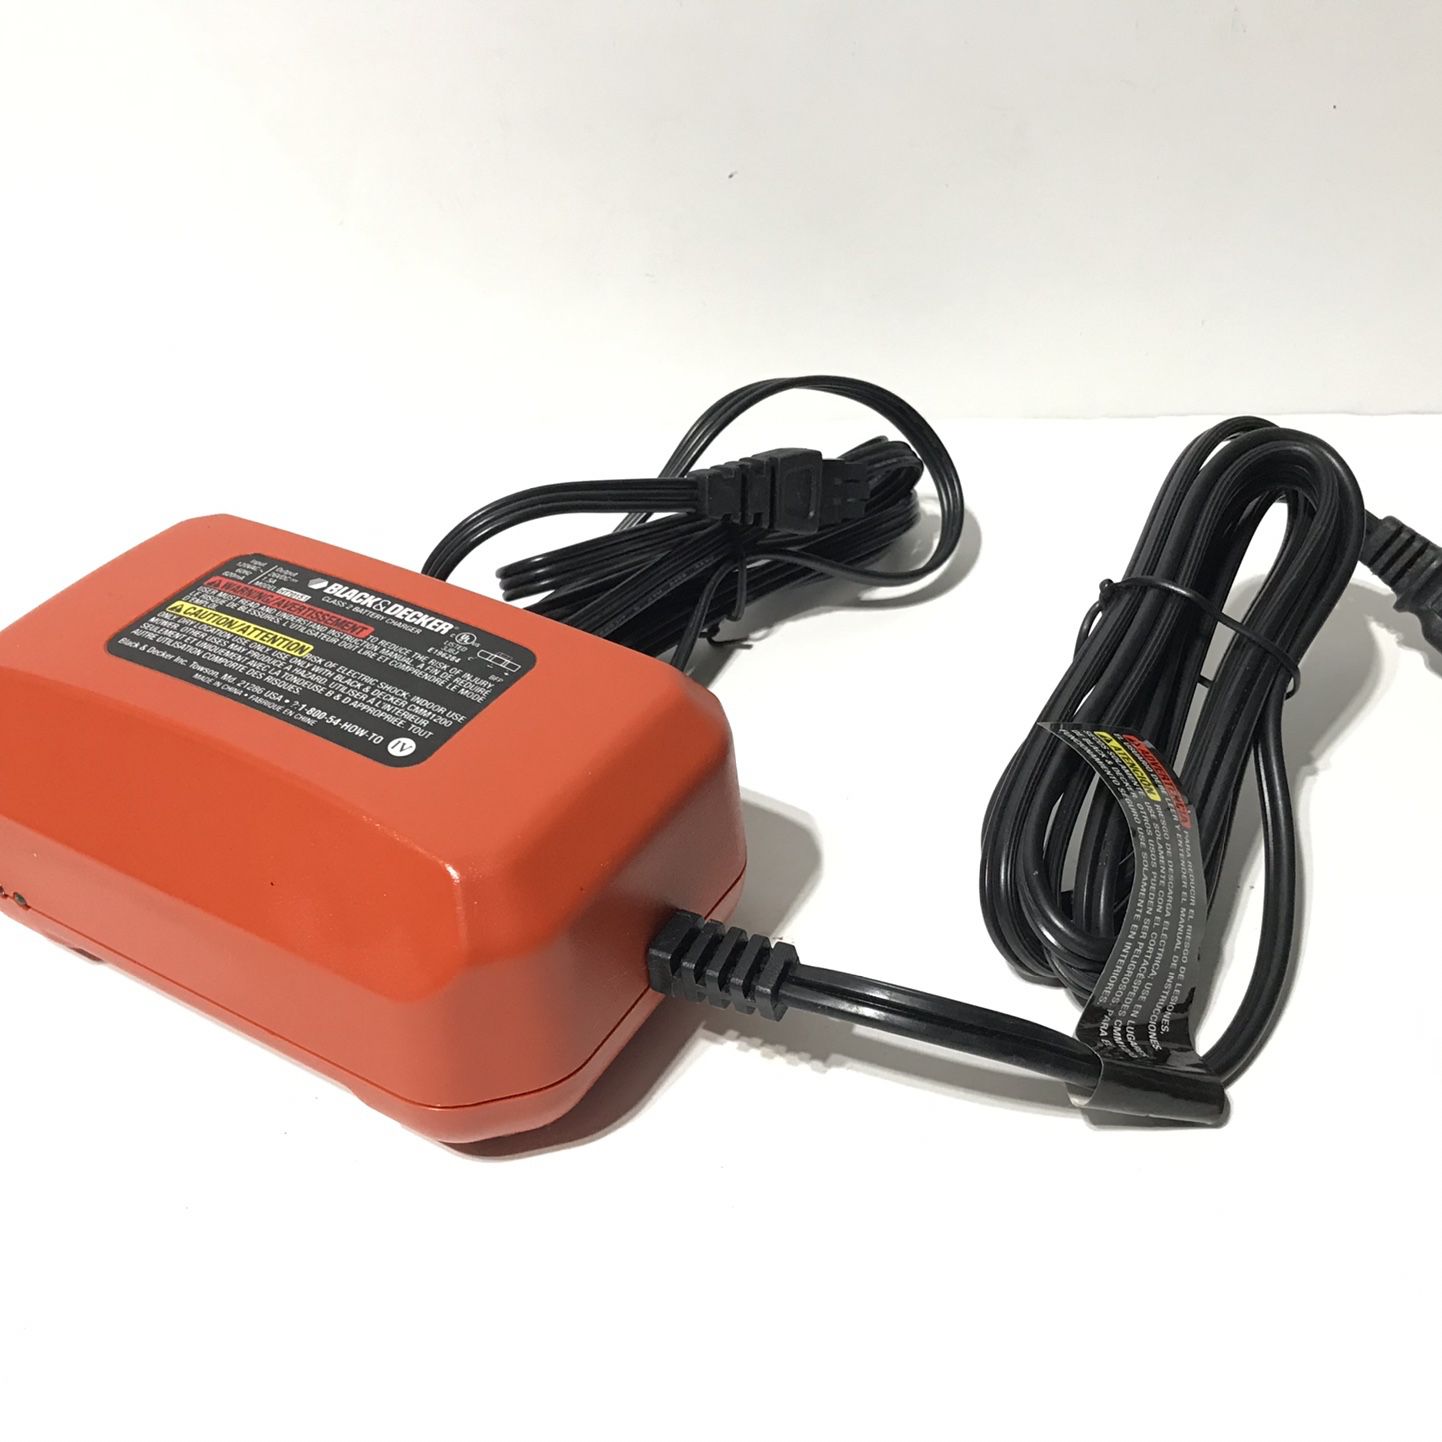 Black & Decker - mower battery charger - model HT70151 - Out 26V 1.5A EUC  for Sale in Sacramento, CA - OfferUp